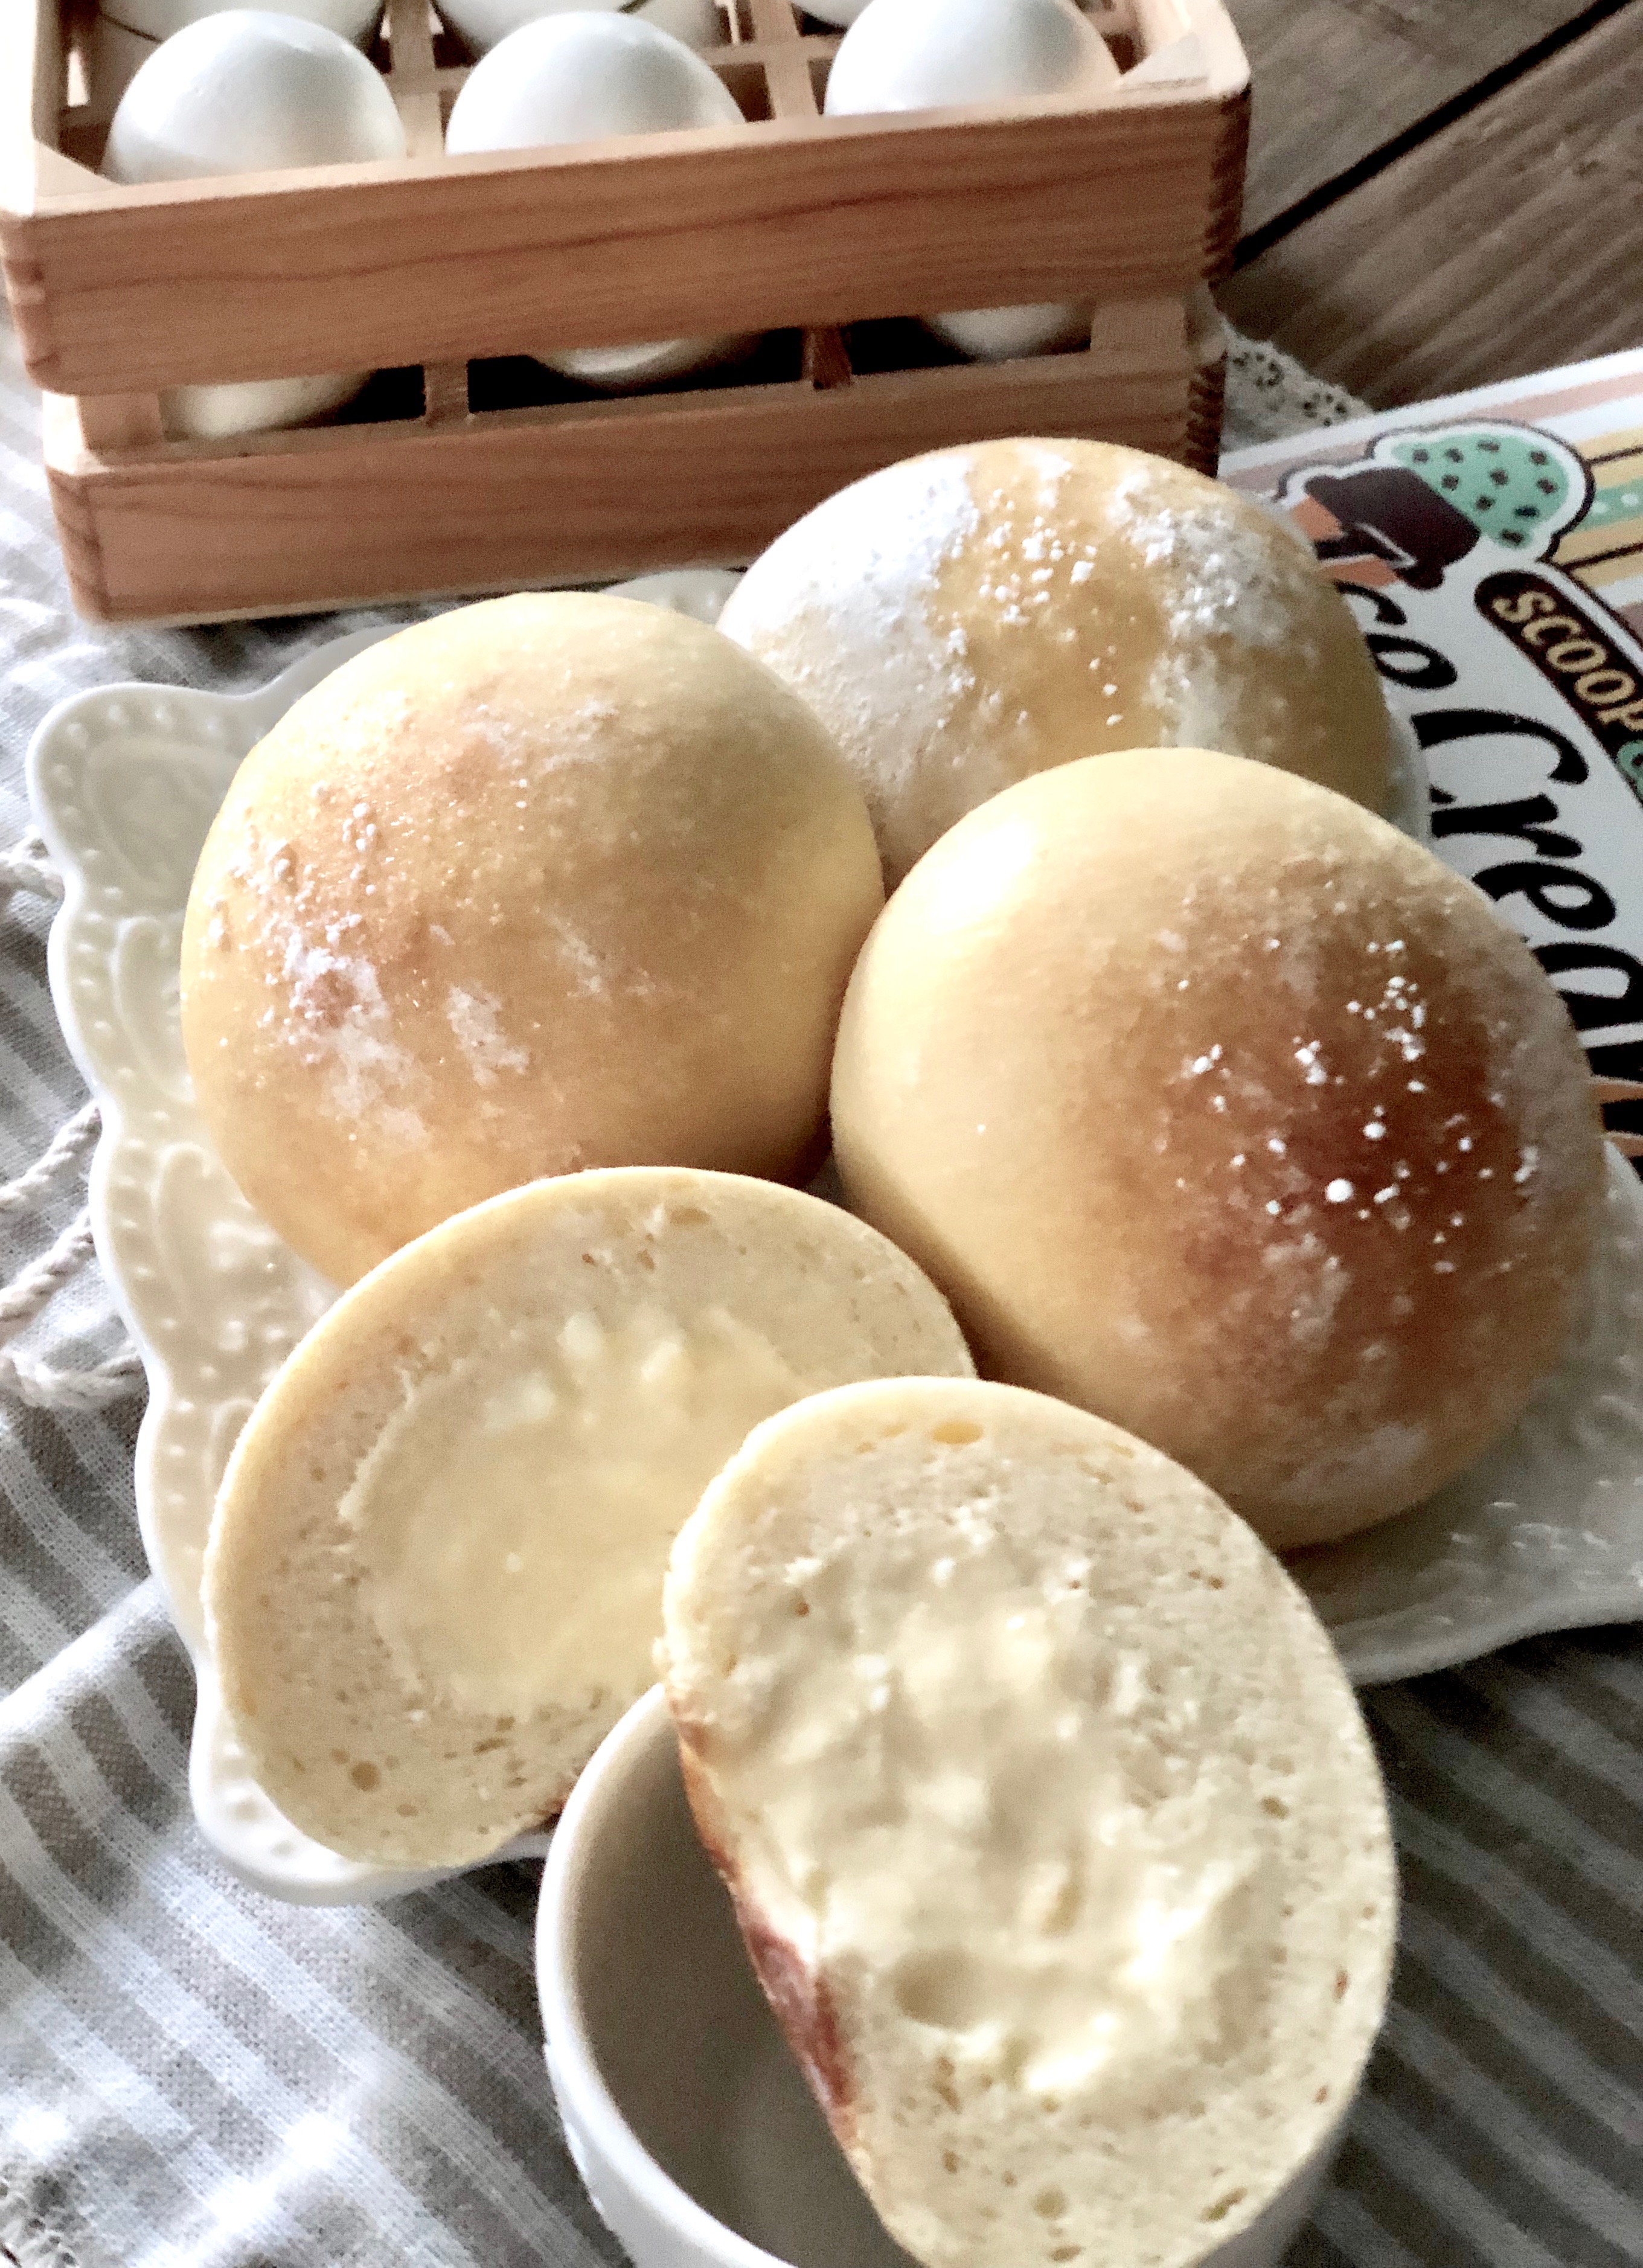 The viral ice bun ~ highly recommended 网红冰面包 ～ 强推